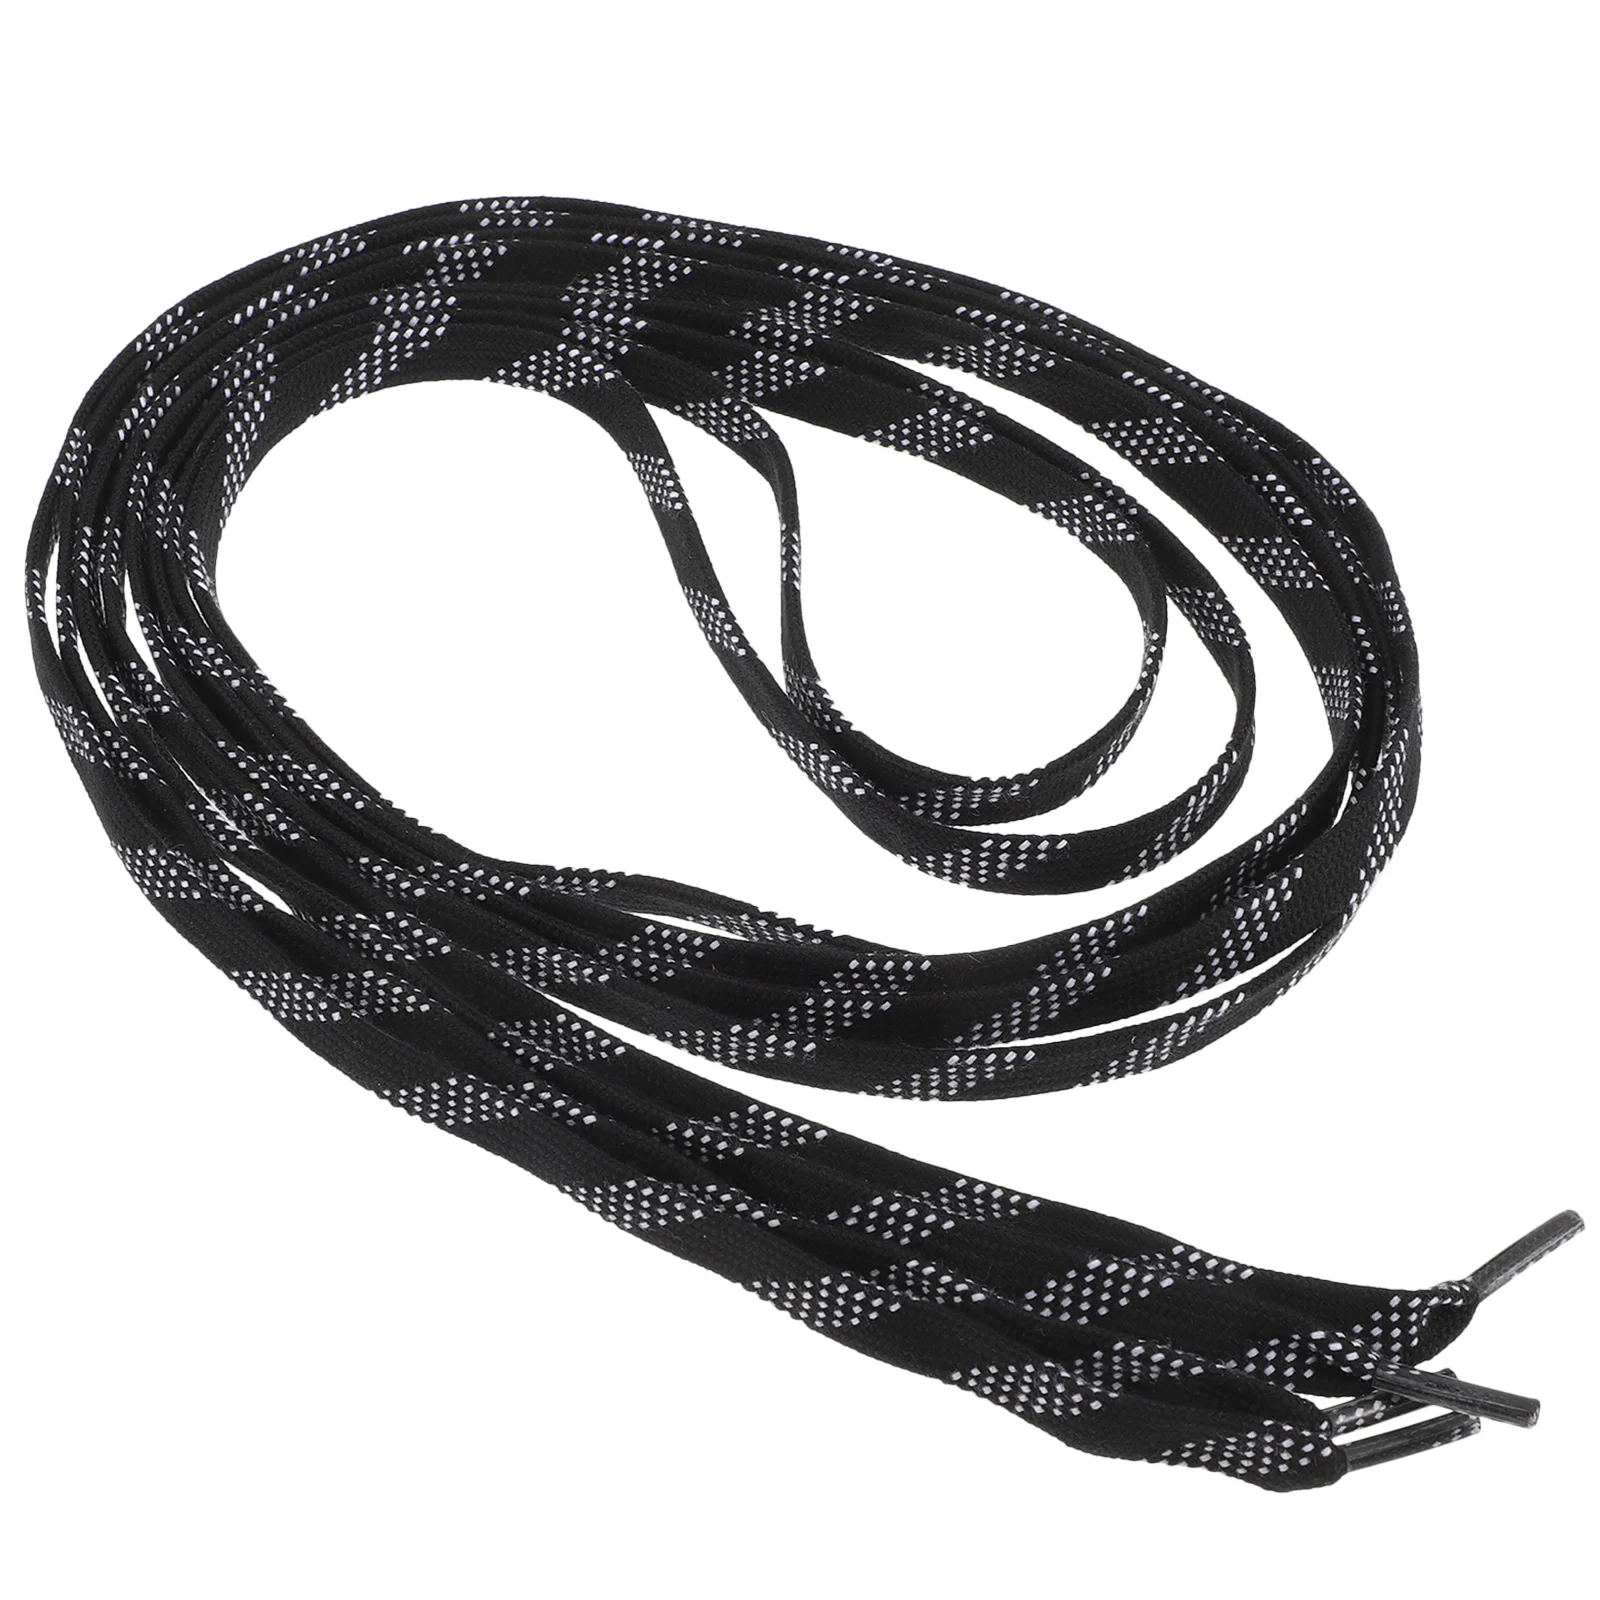 

Sneaker Laces Hockey Shoe Wear-resistant Shoelaces Shoestring Athletes Gifts Ice Skates Fashionable Polyester Ties Waxed